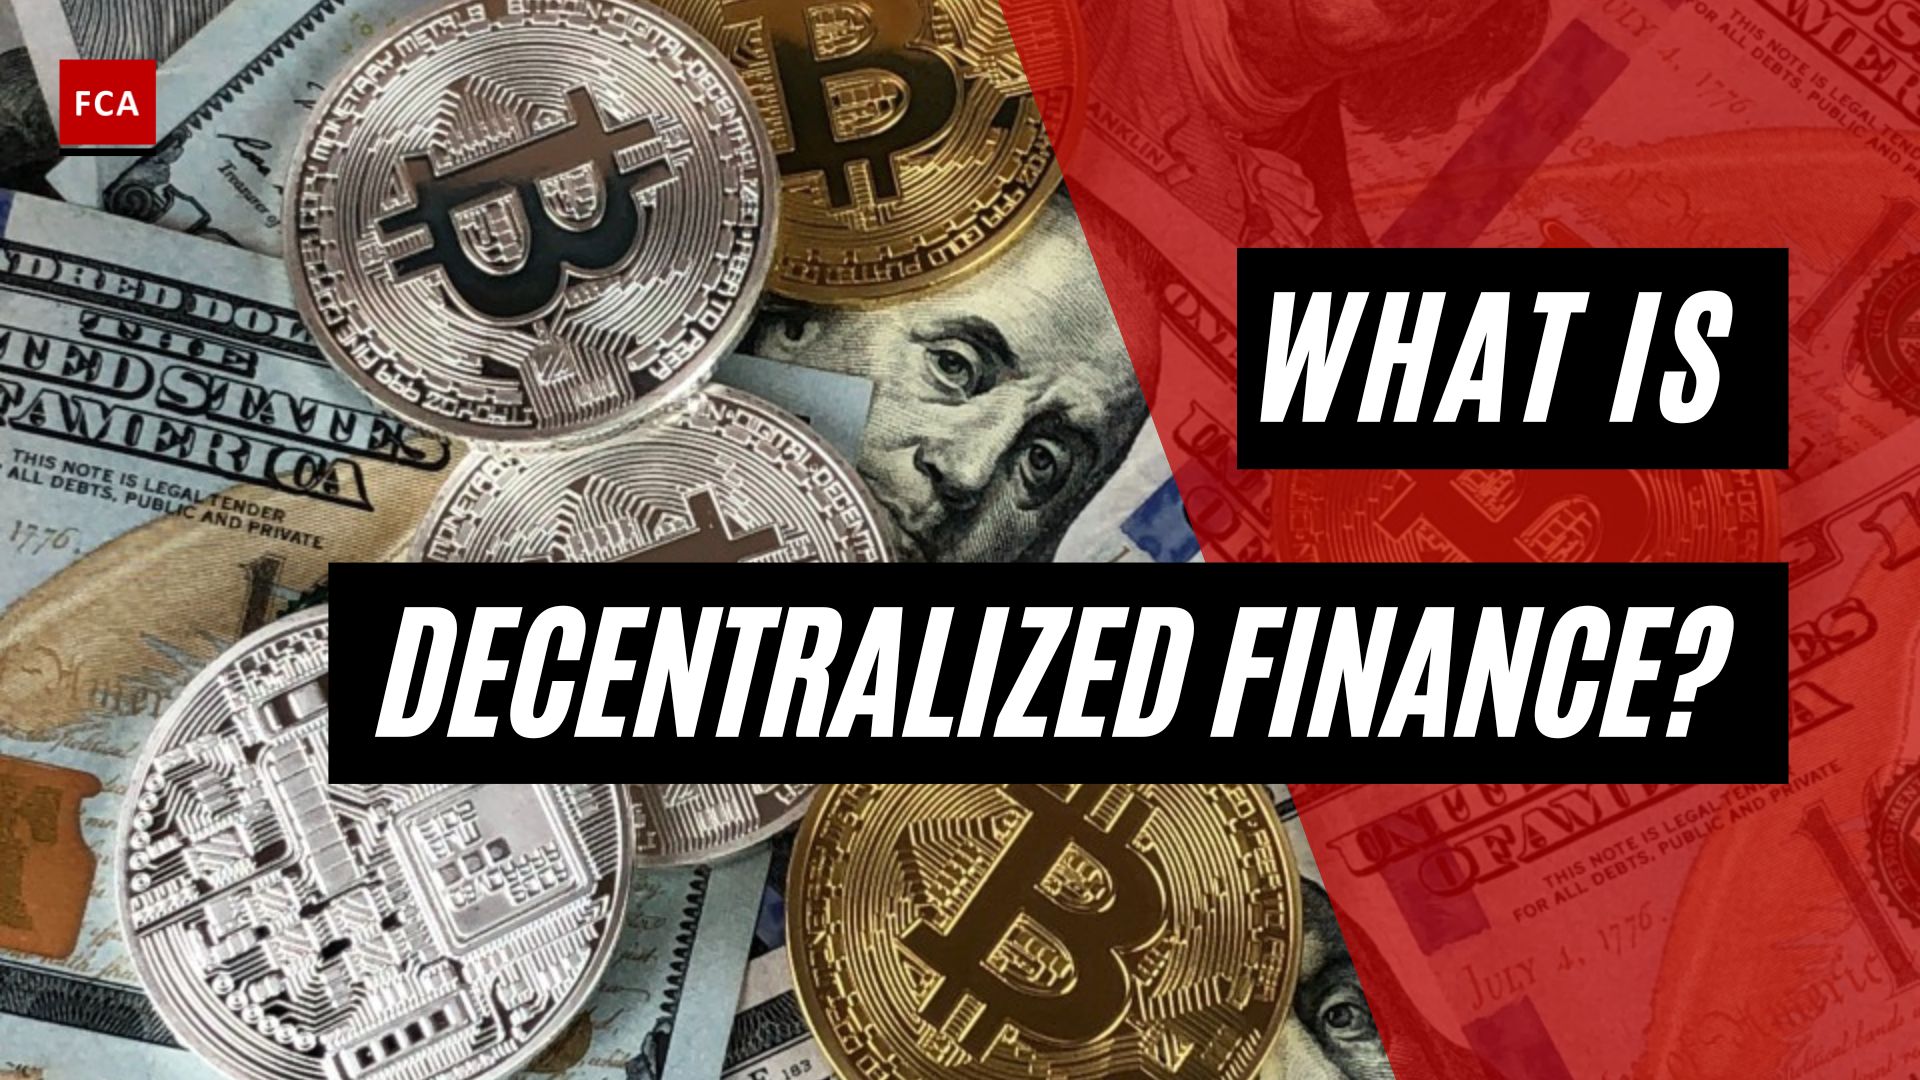 What Is Decentralized Finance?